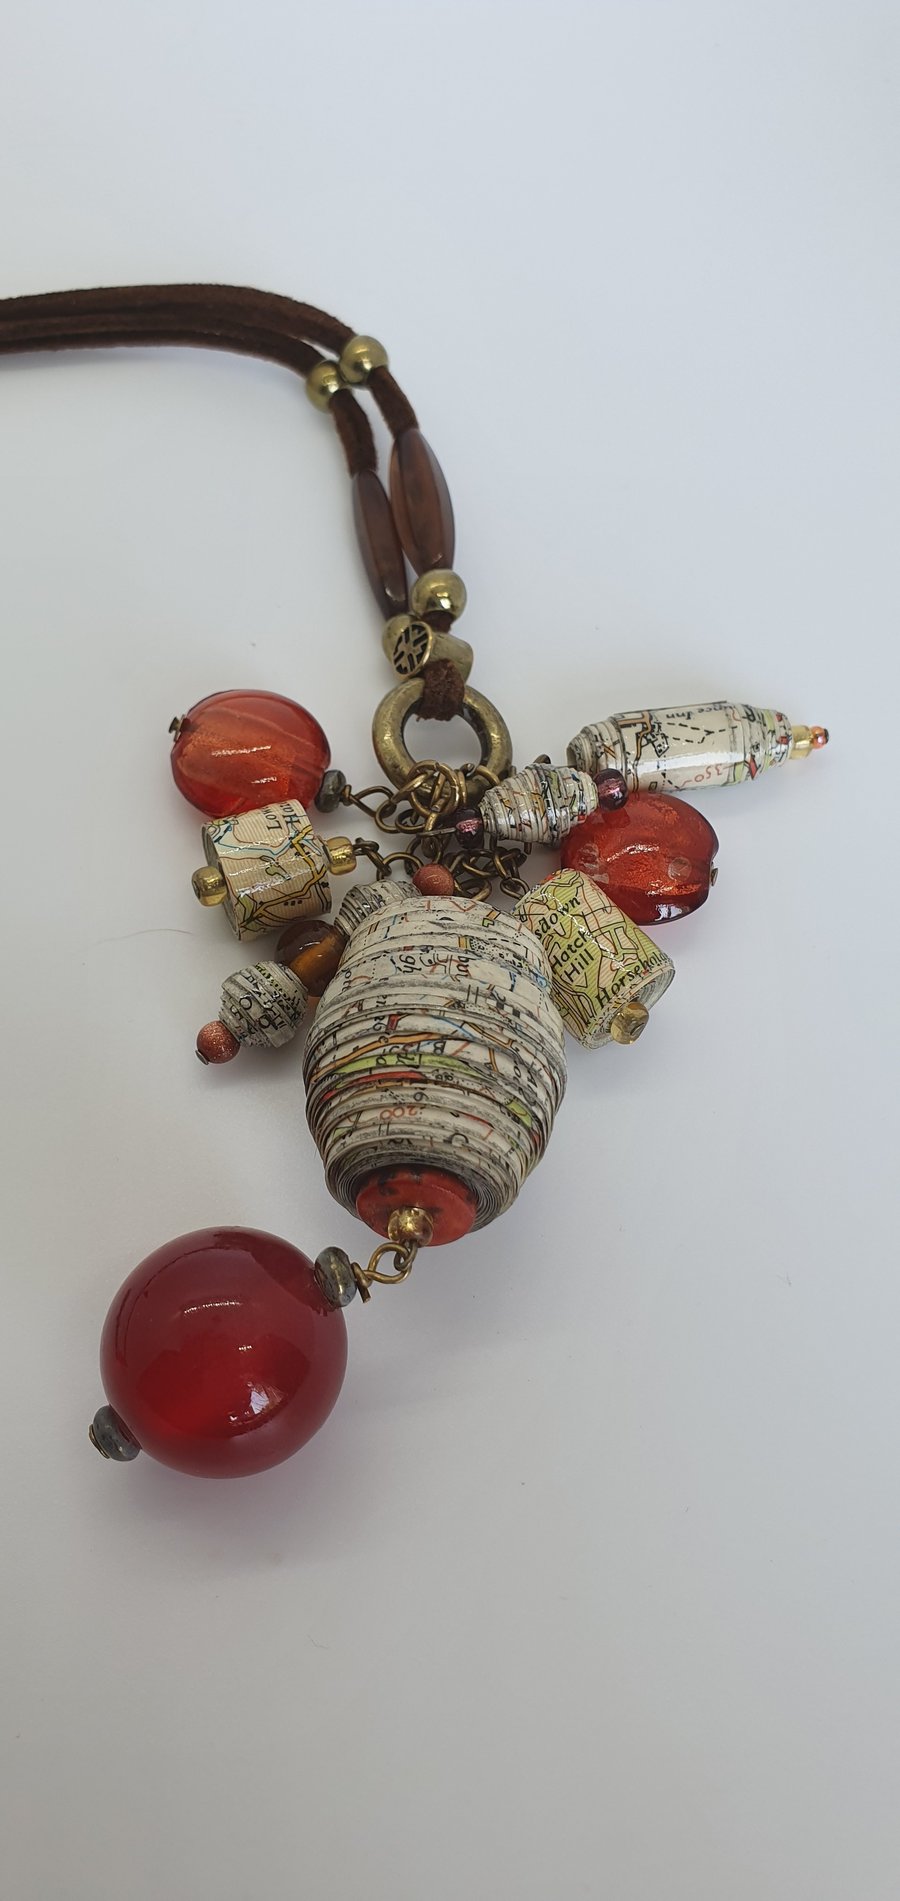 Rope necklace with paper beaded pendants made of old maps